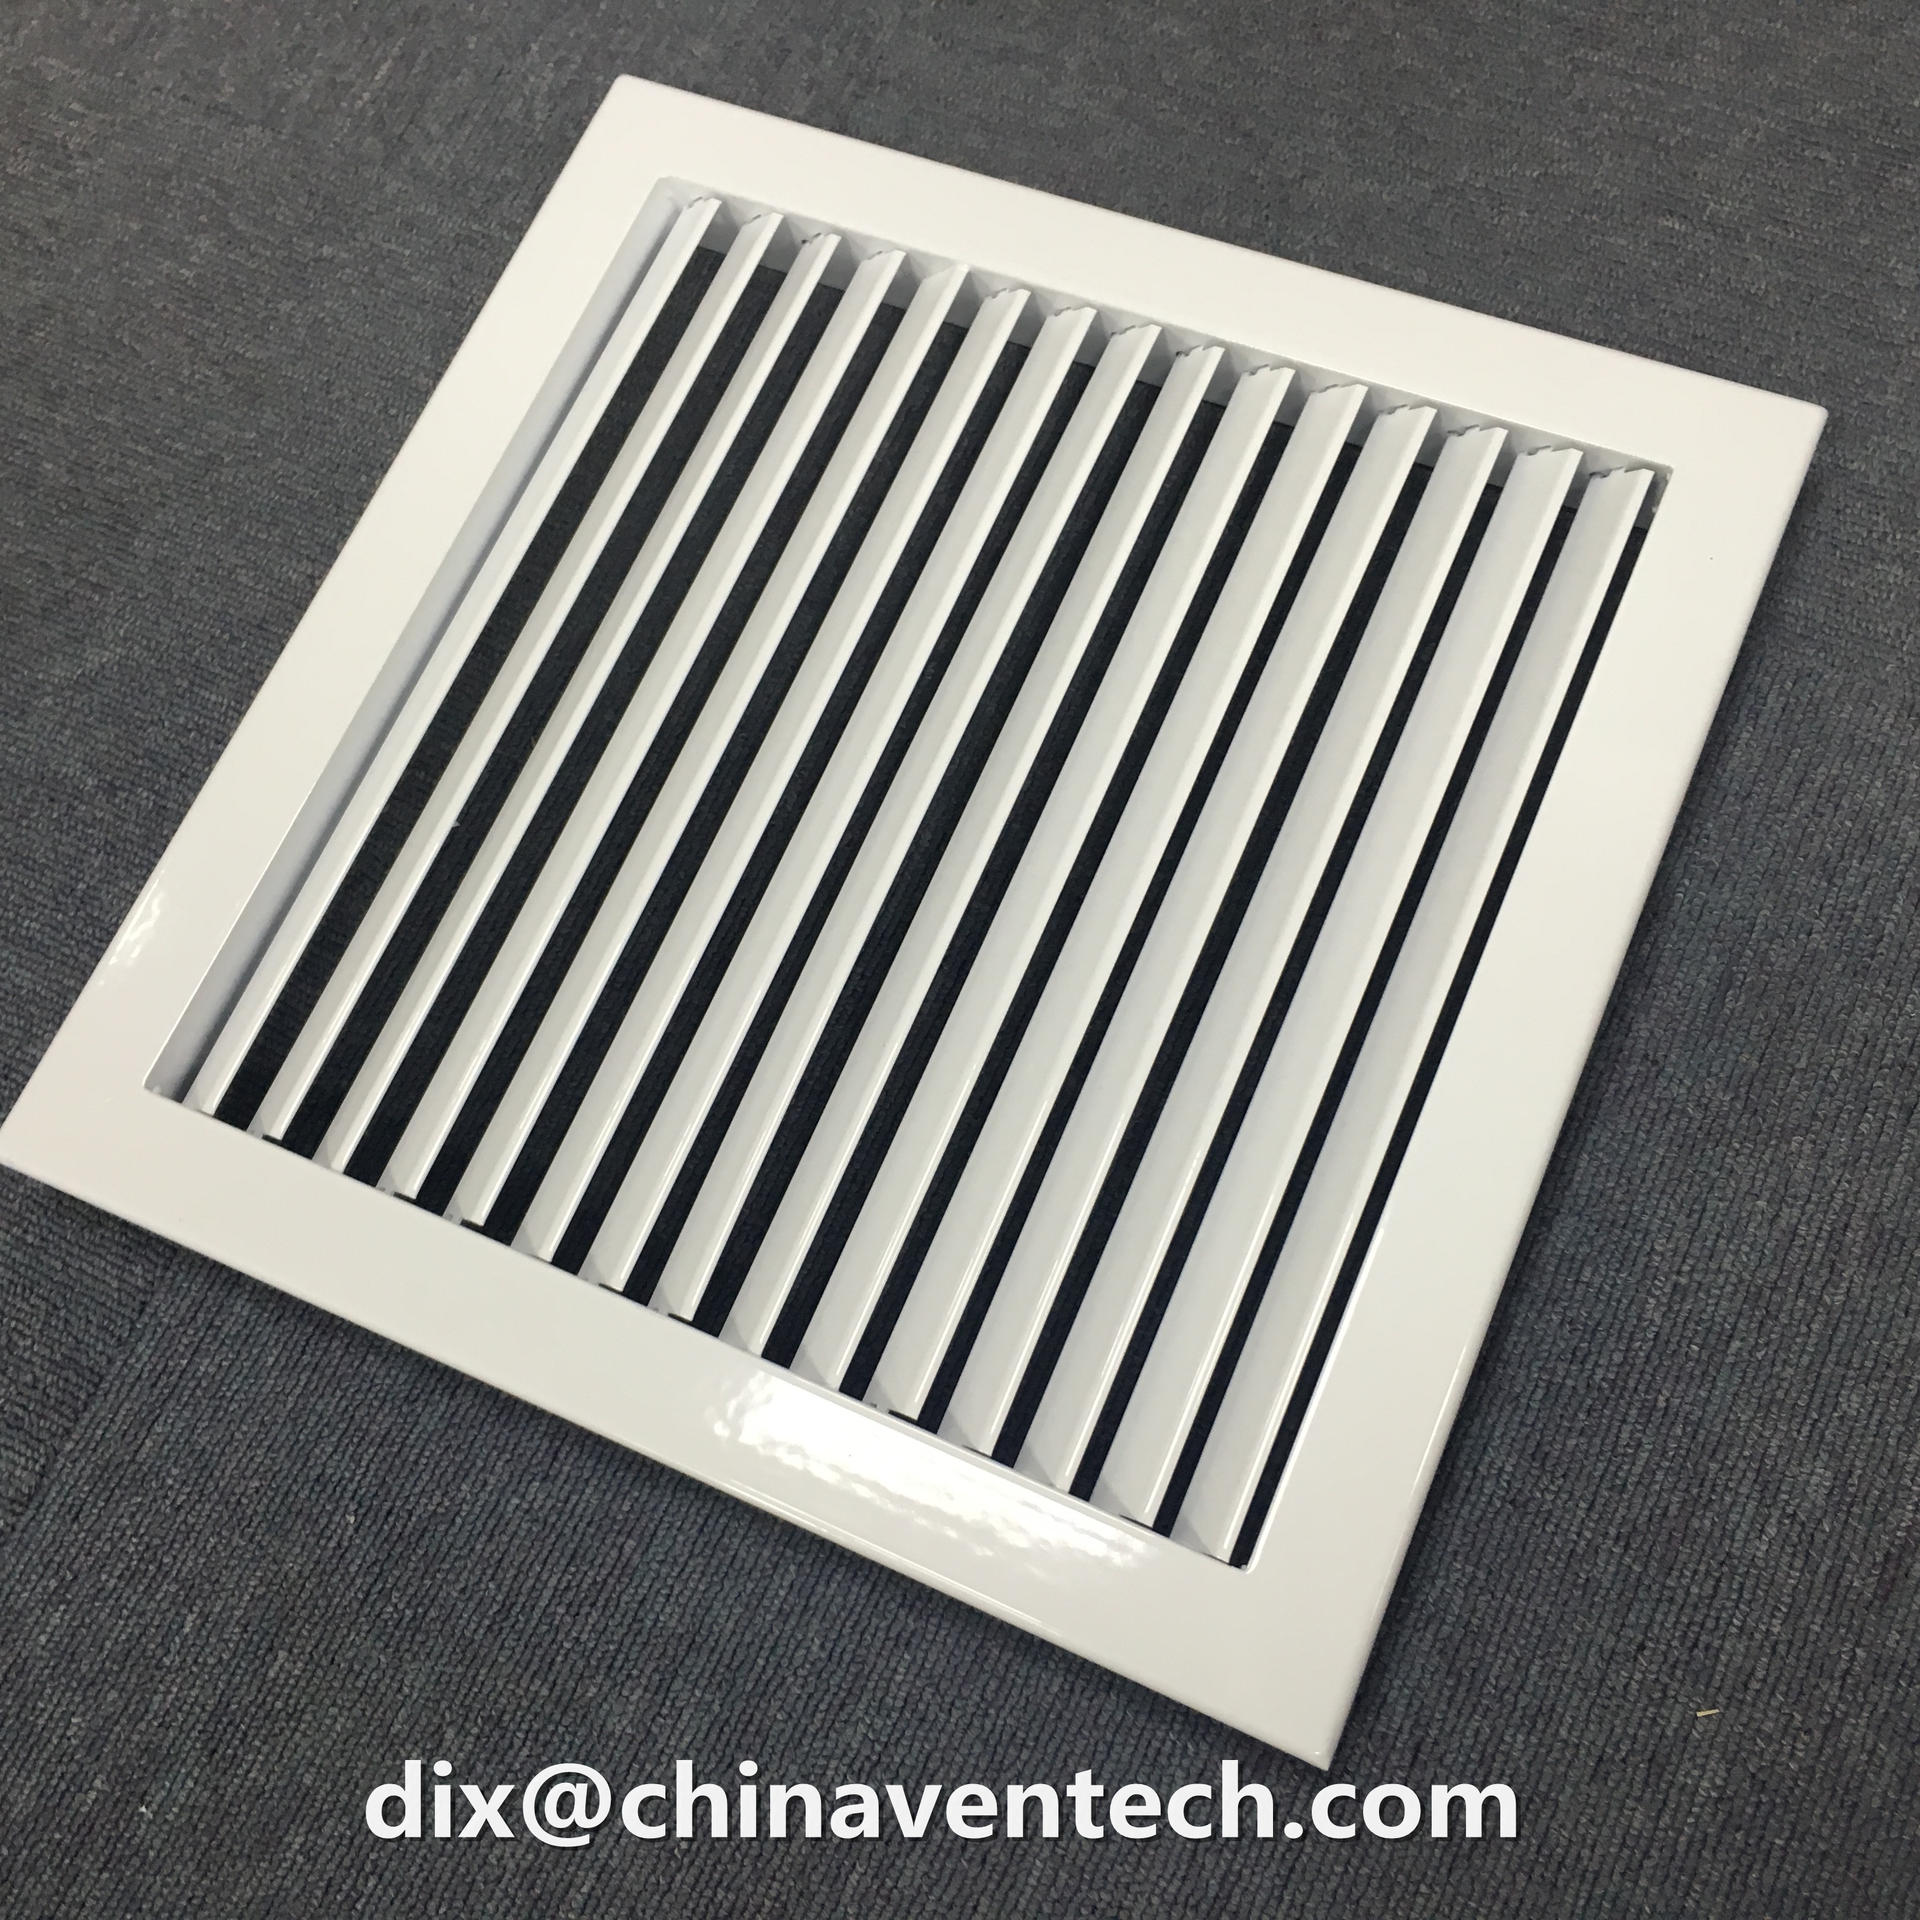 Decorative Diffusers Guangdong Aluminum Obd For Outlet Grille Air Conditioning System Hvac